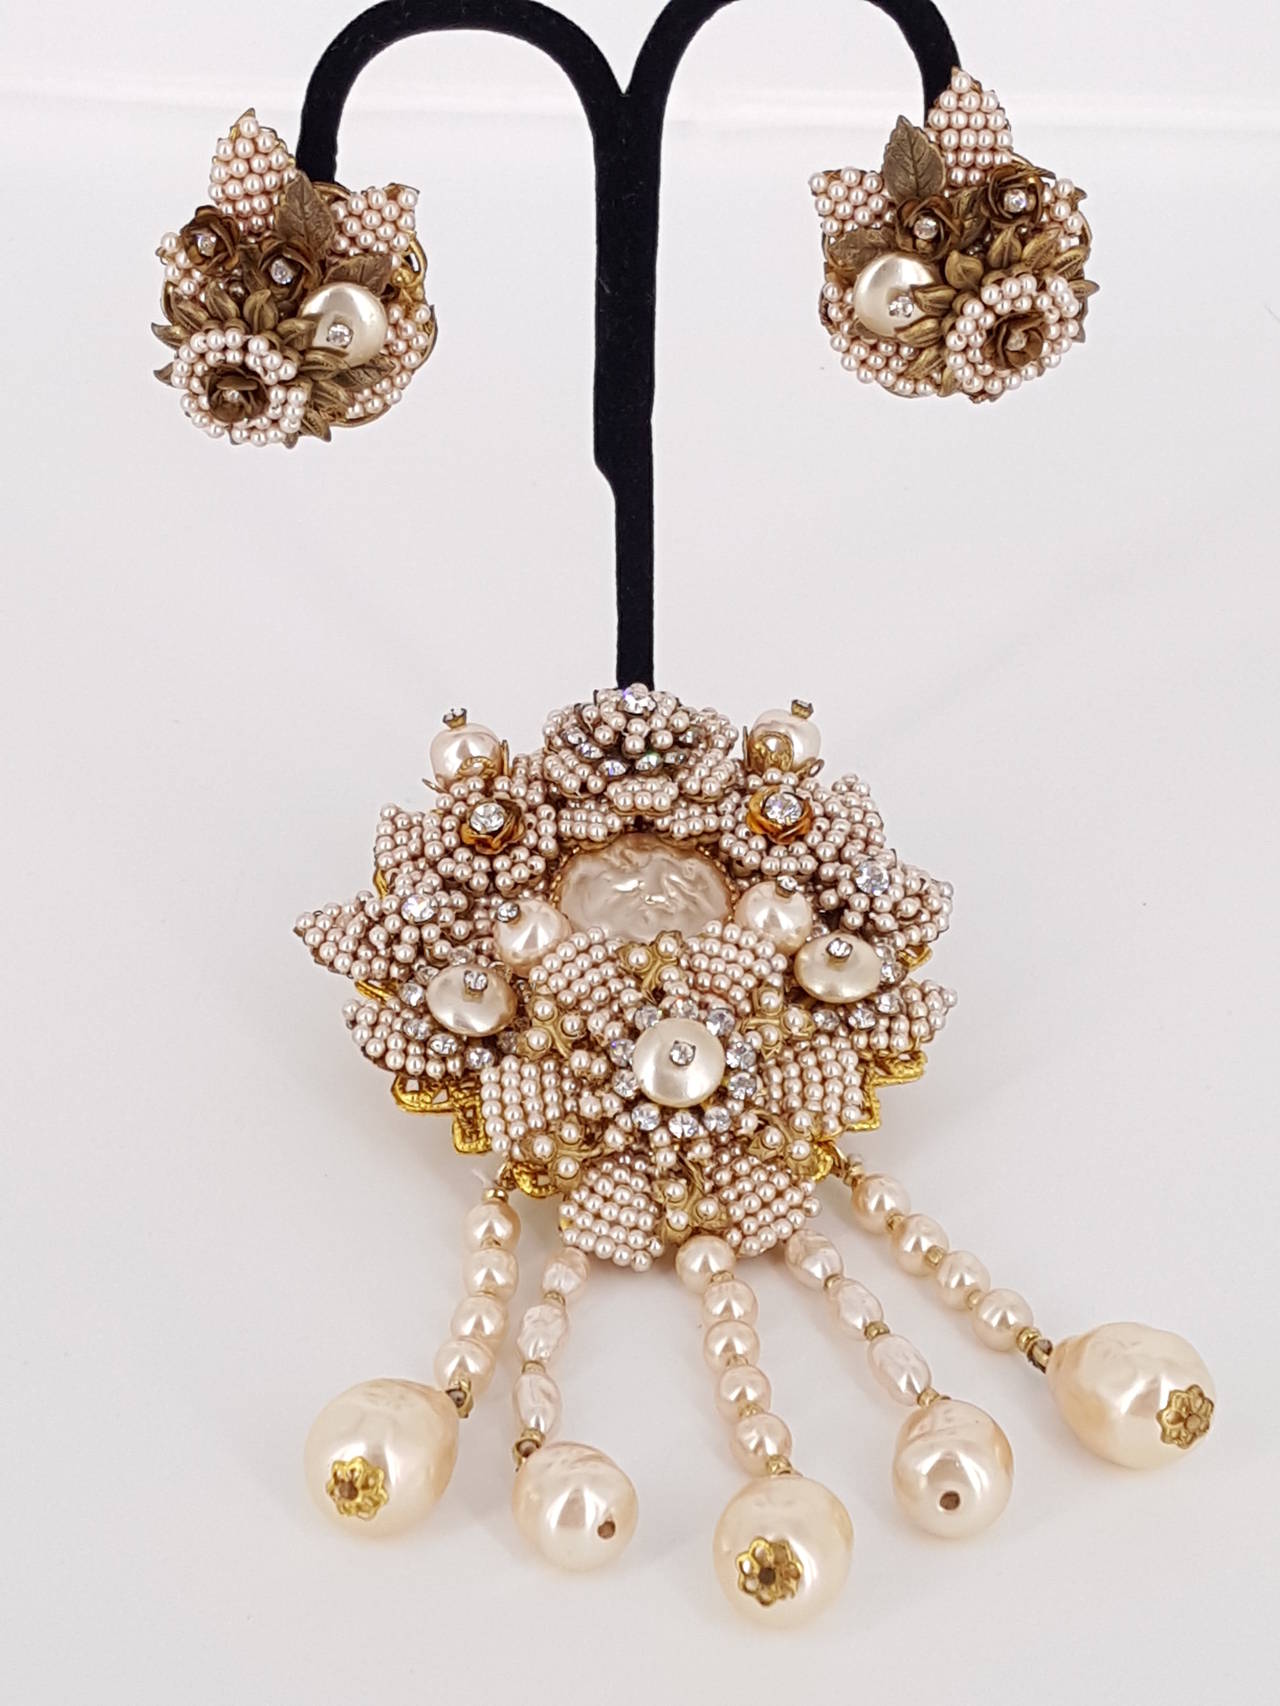 Women's Vintage Stanley Hagler Brooch And Earrings With Seed Pearls & Baroque Pearls. For Sale